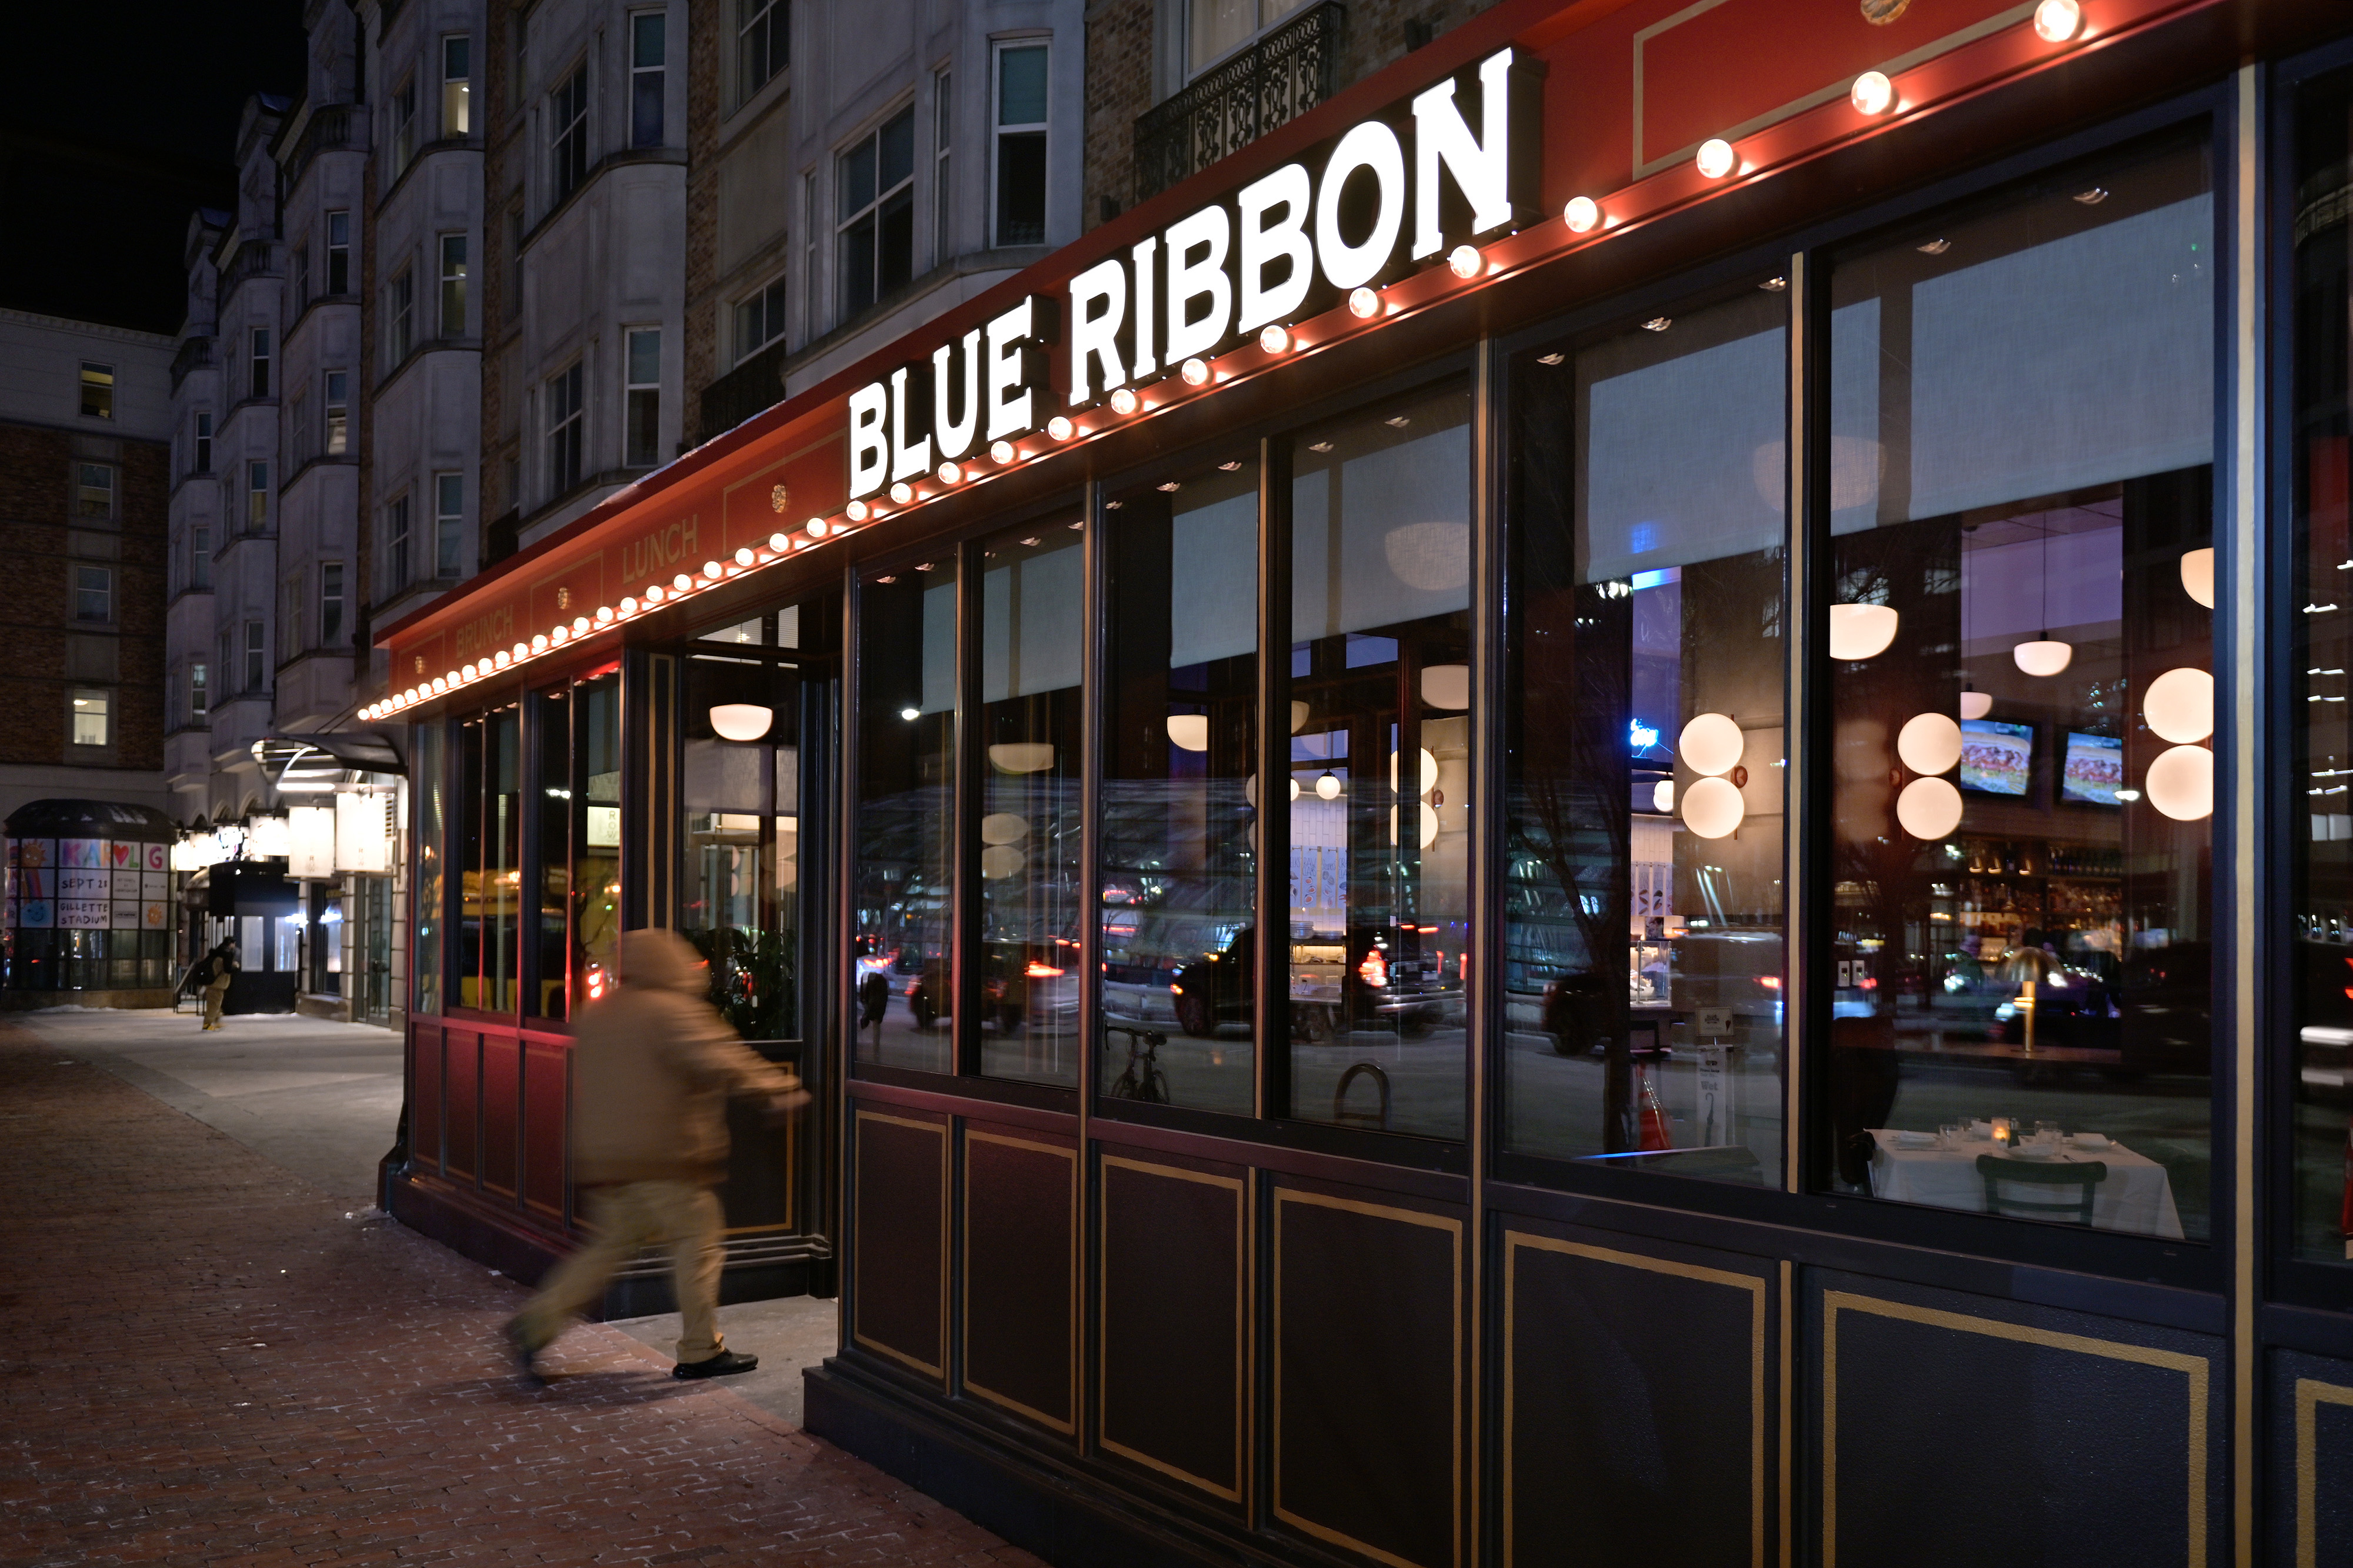 What it's like to eat at Blue Ribbon Brasserie in Kenmore Square